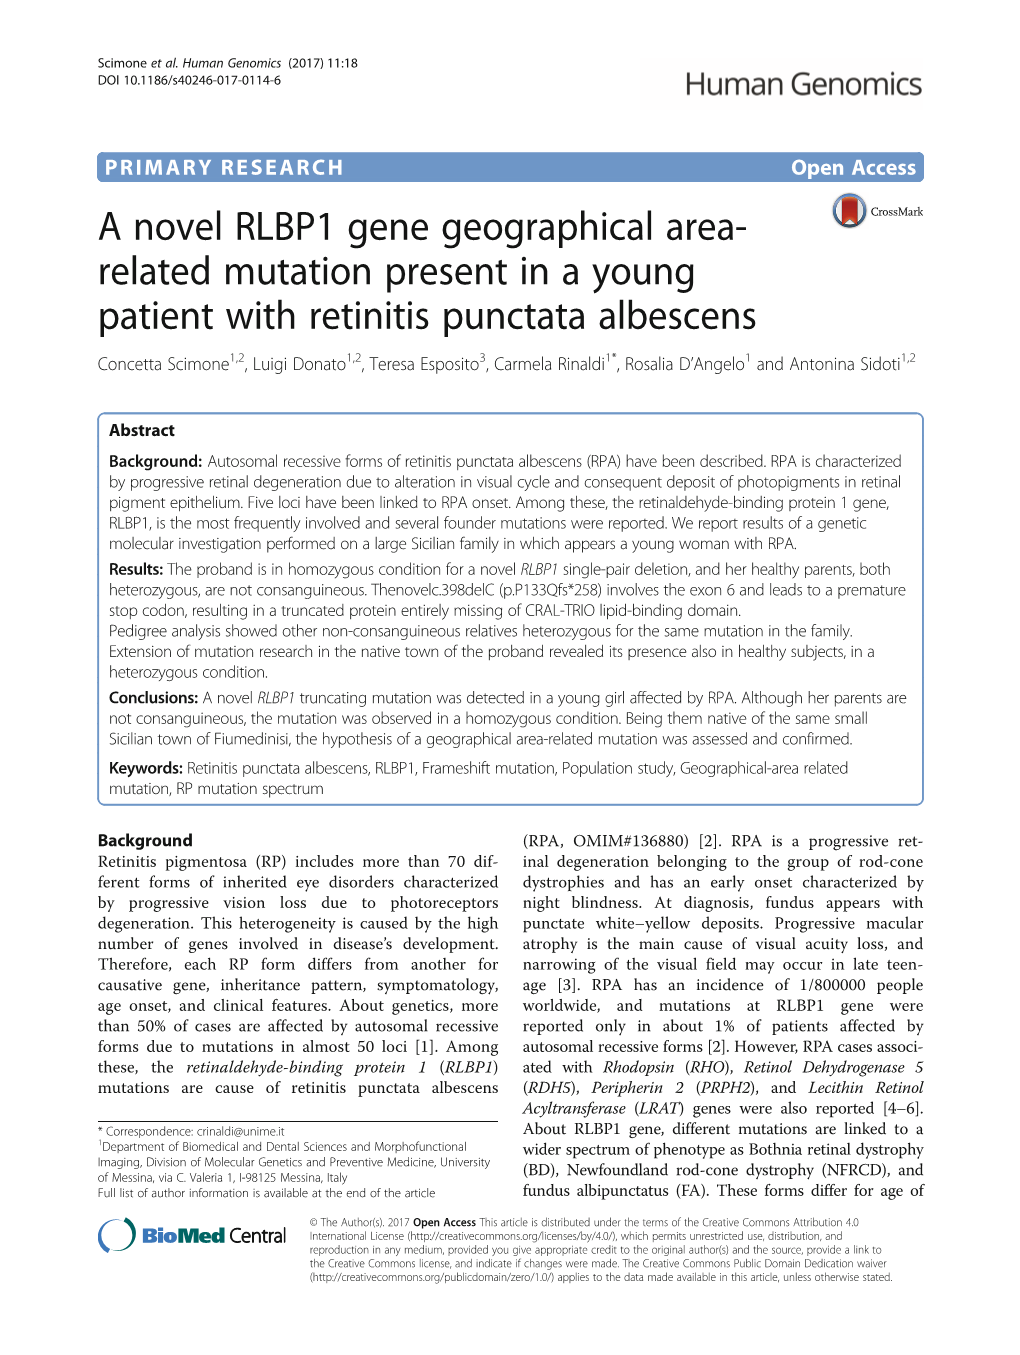 A Novel RLBP1 Gene Geographical Area-Related Mutation Present in A